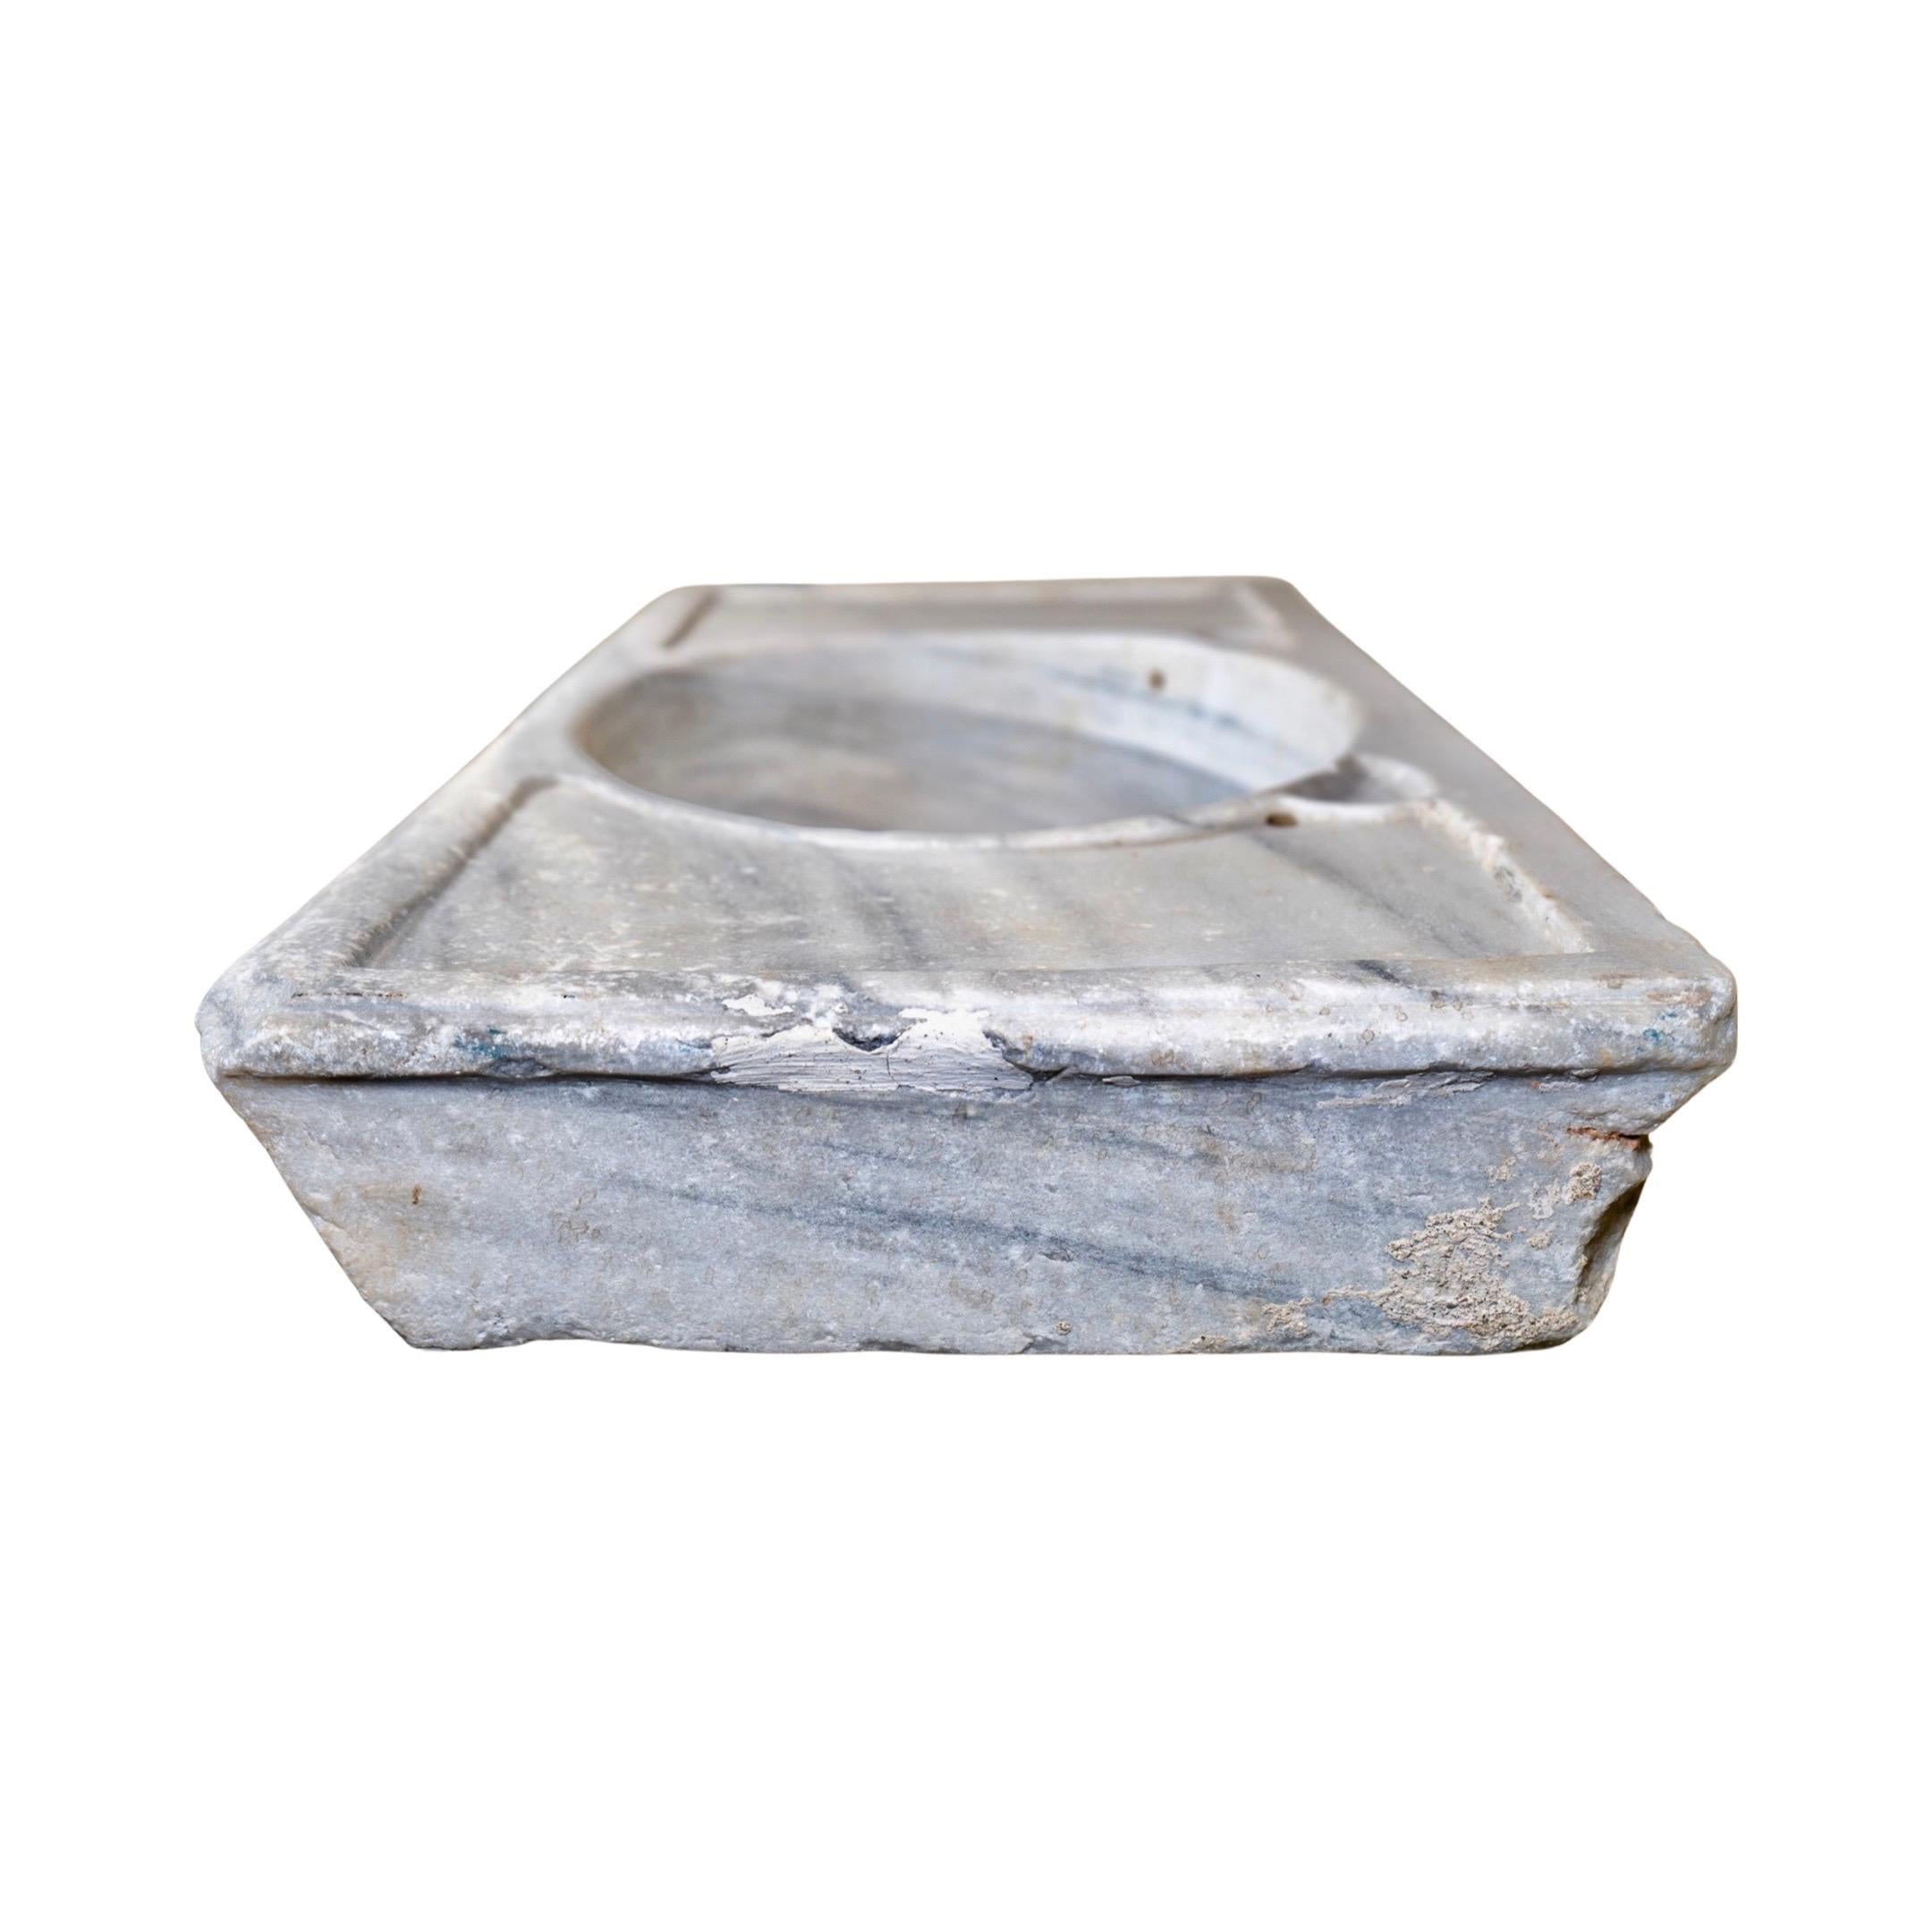 Greece White Veined Carrara Marble Sink For Sale 1